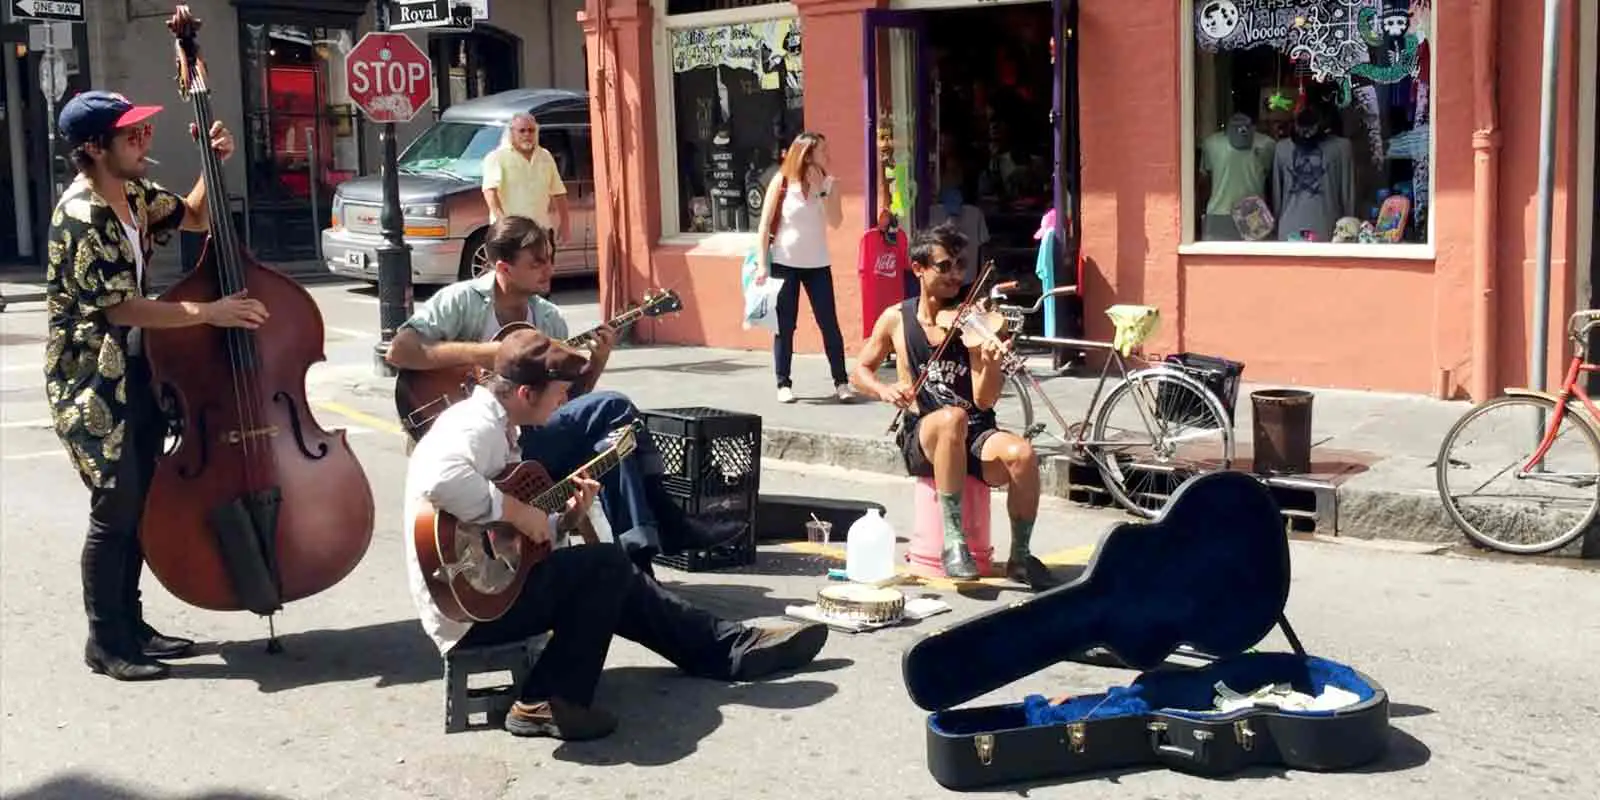 New Orleans travel tips: Street musicians perform on Royal St. in the New Orleans' French Quarter. If you stop to listen to a street musician, leave a tip!